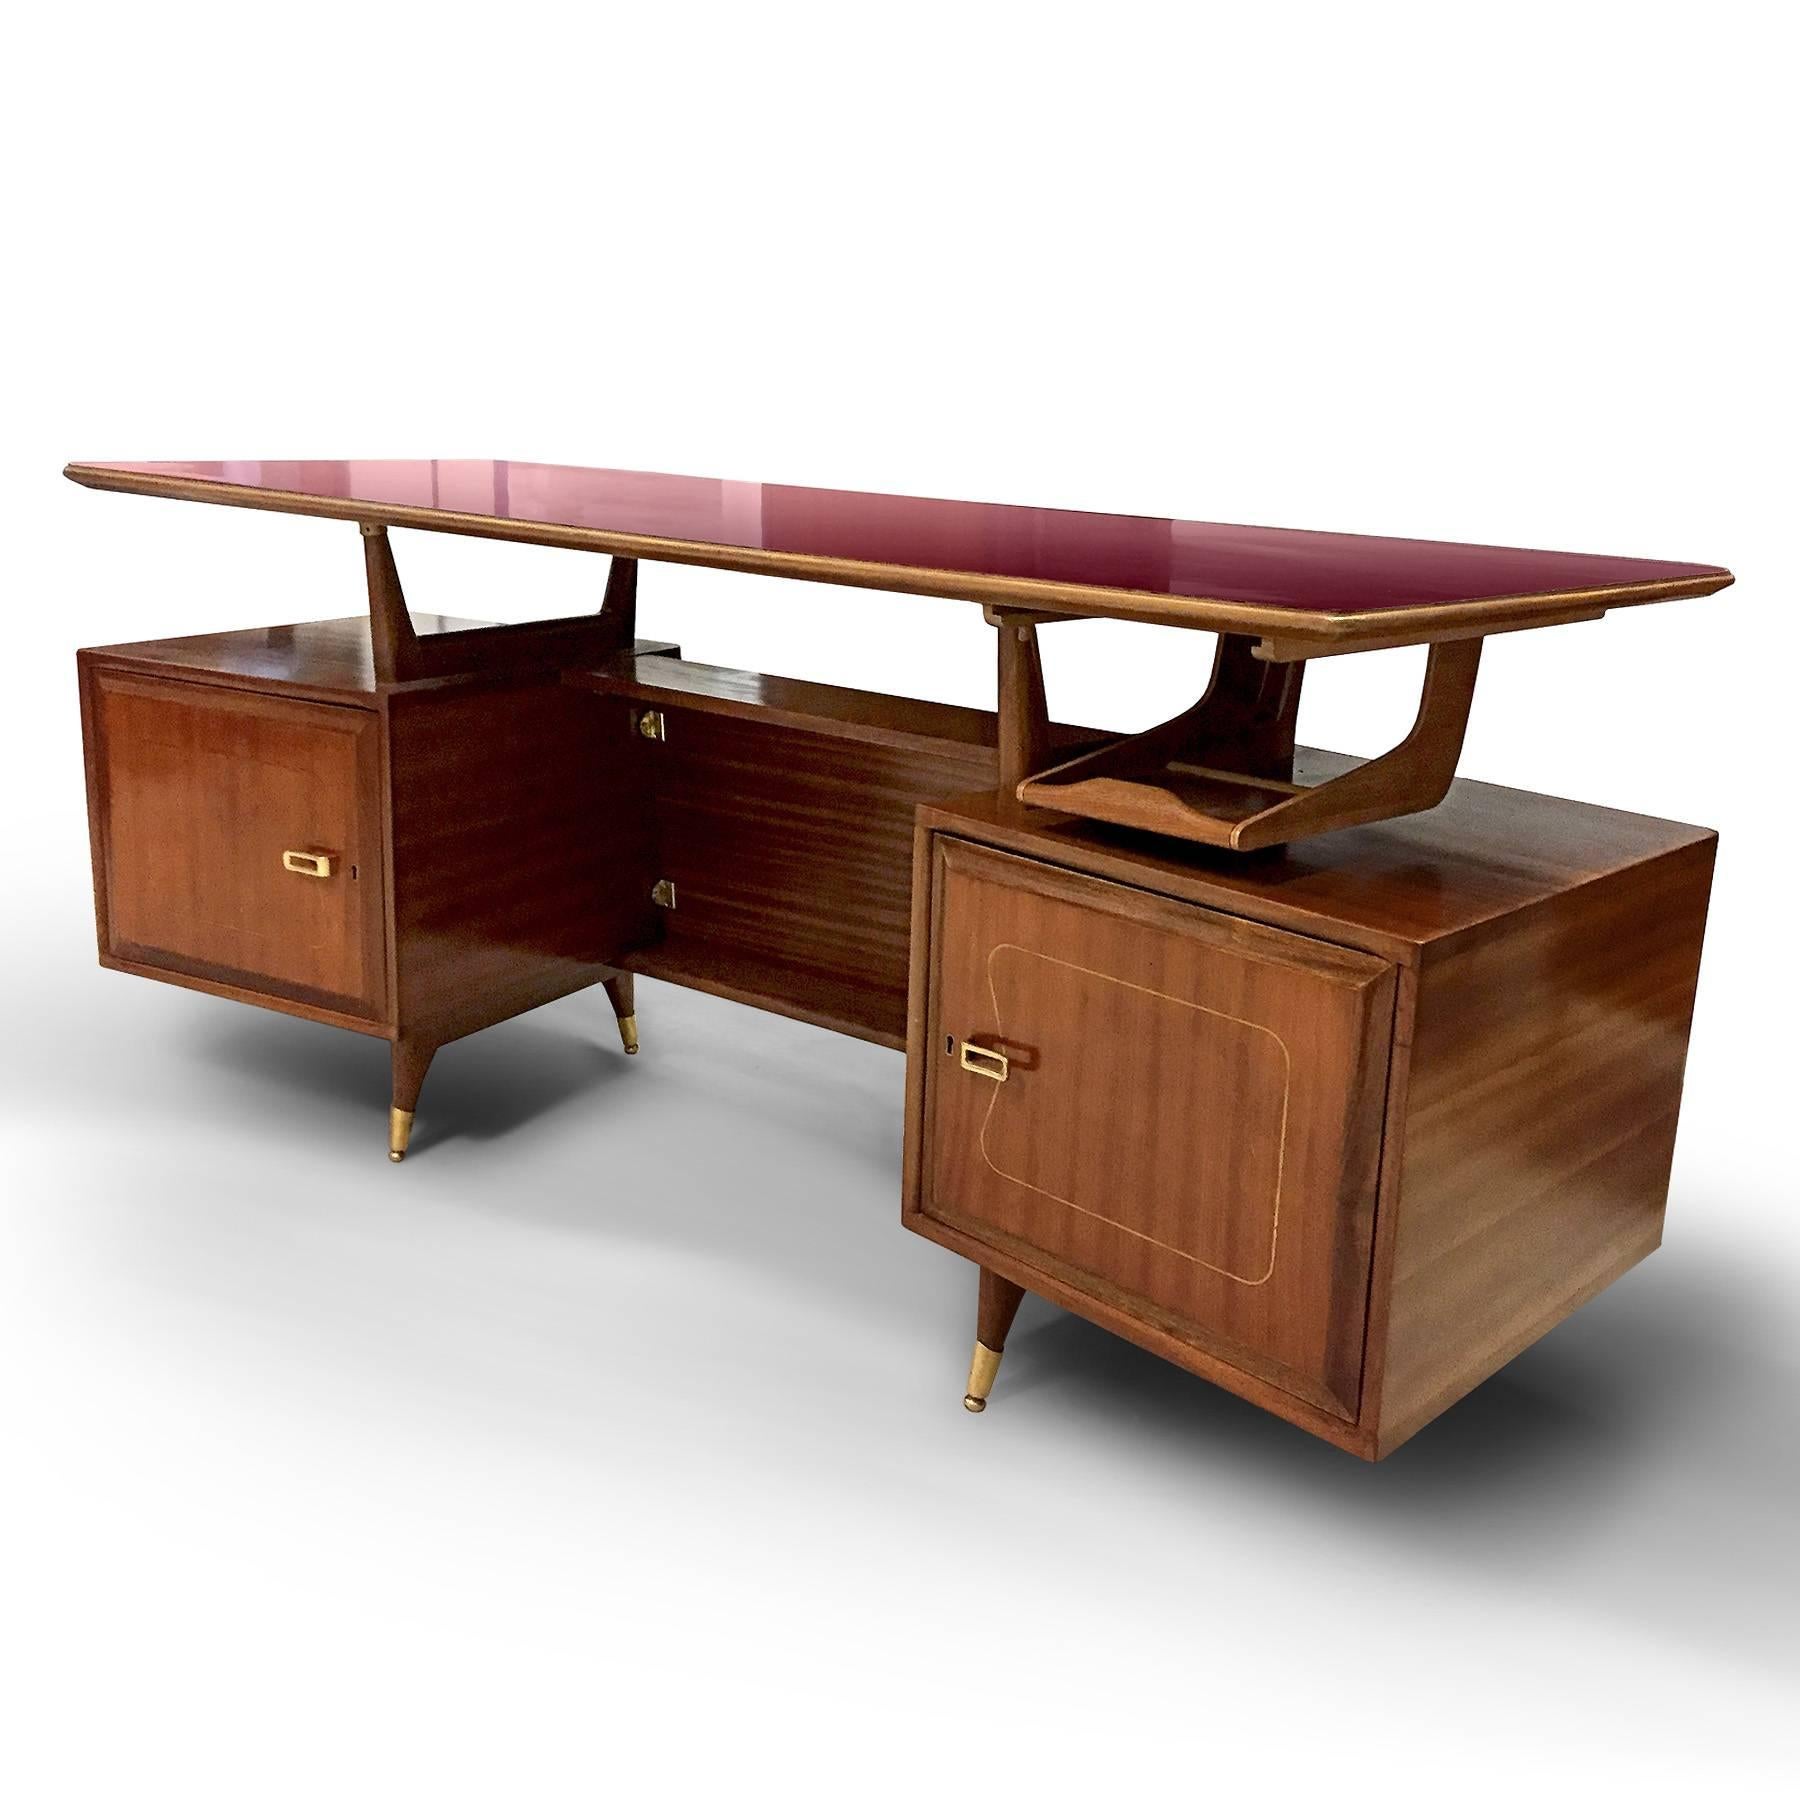 Unique design for this Italian executive desk of 1950s, attributed to La Permanente Mobili Cantù.
The structure is in mahogany veneer, finished with brass details.
Two doors open to reveal three amazing bent plywood drawers on either side.
It’s